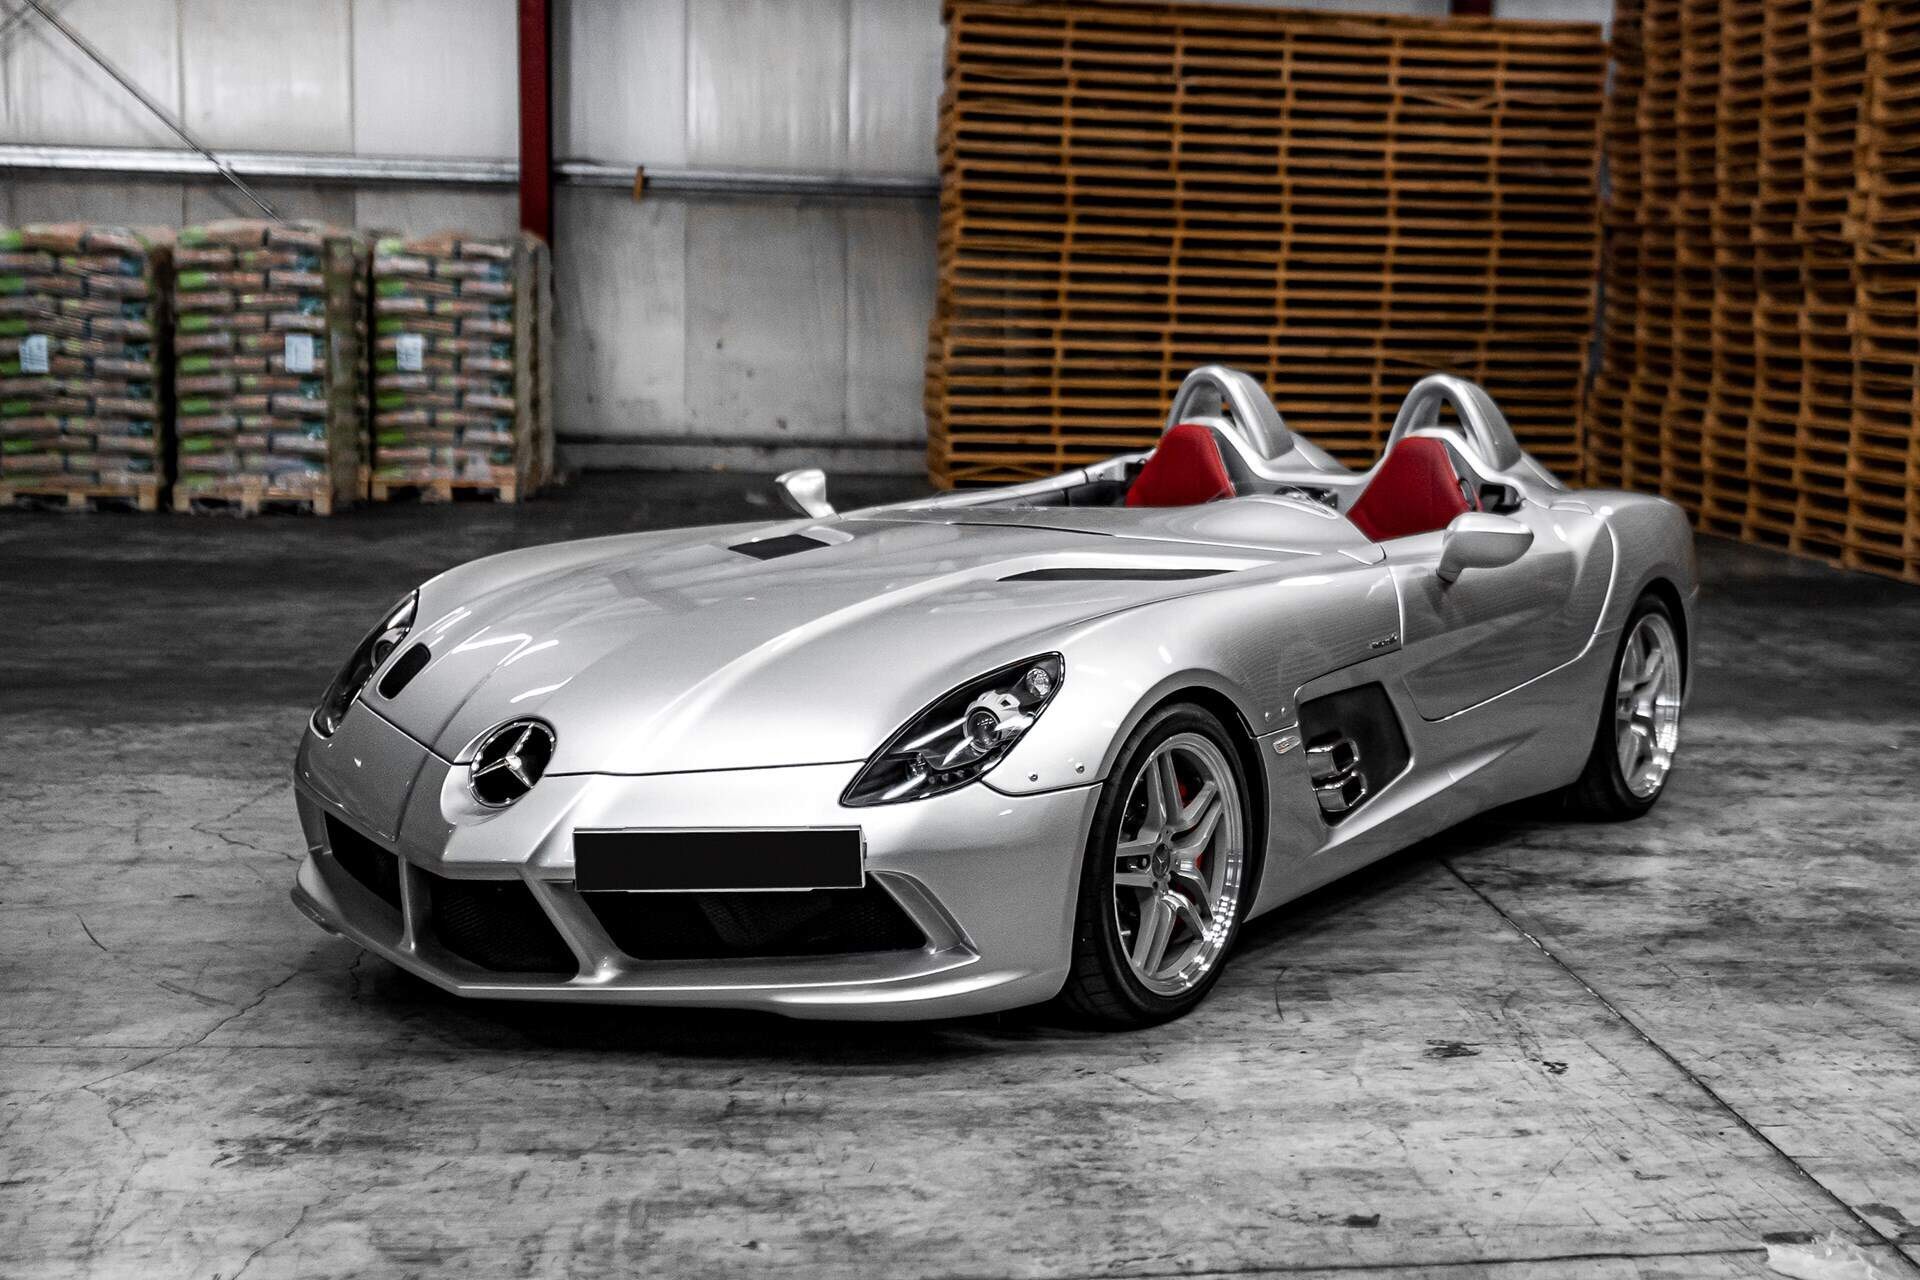  Front angled picture of a silver Mercedes Benz SLR Stirling Moss.